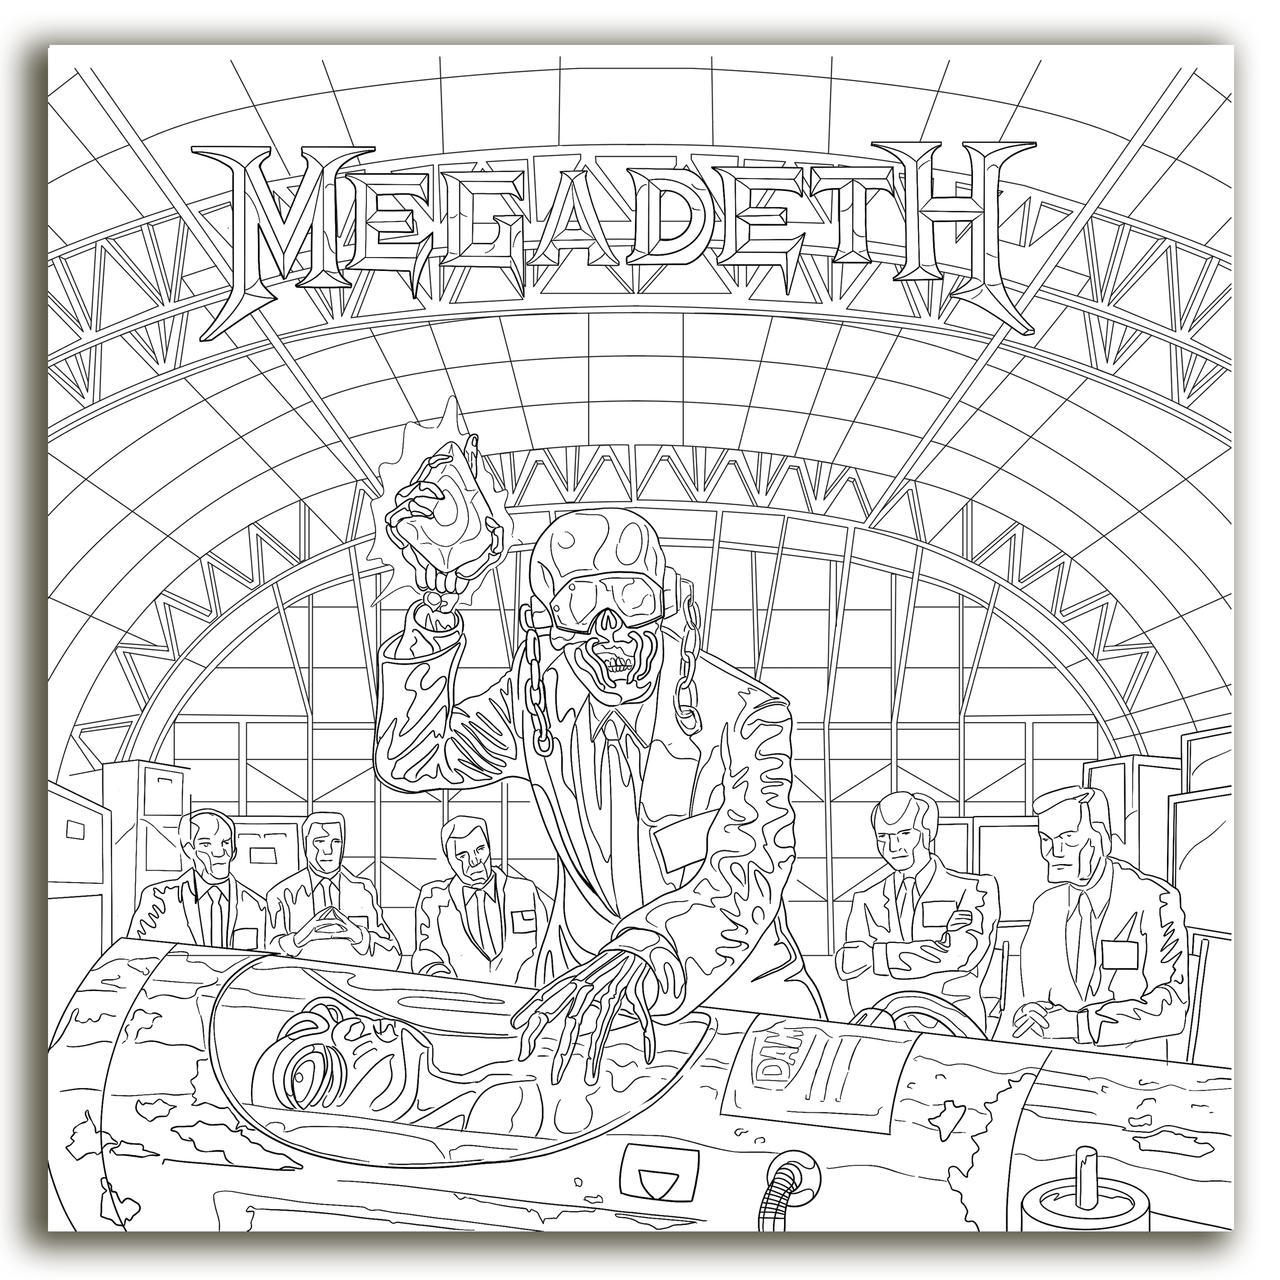 THE OFFICIAL MEGADETH COLORING BOOK